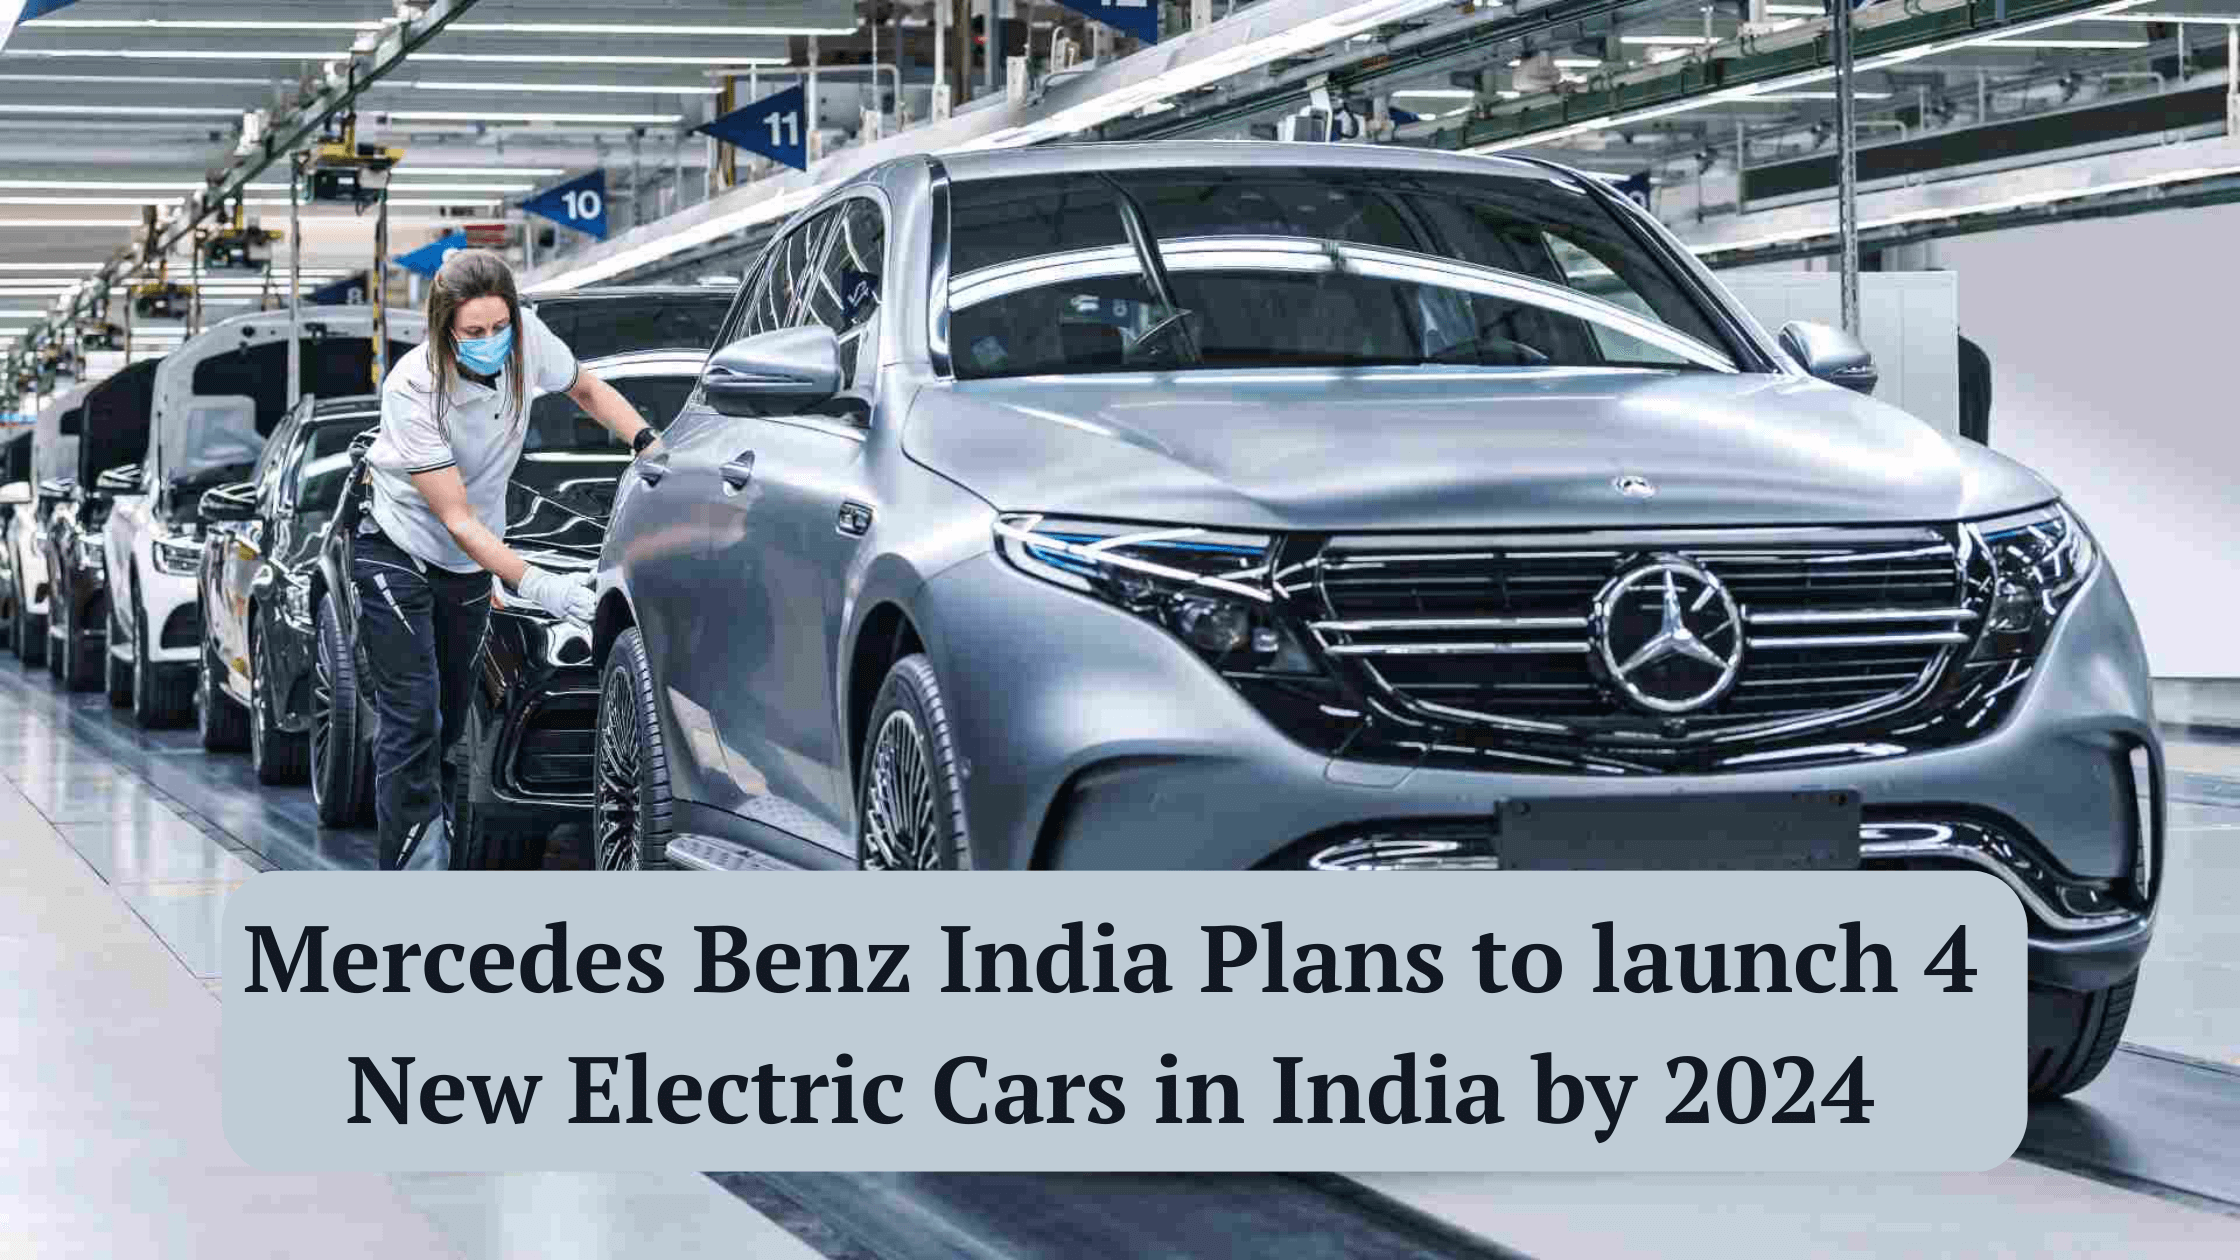 Mercedes Benz India Plans to launch 4 New Electric Cars in India by